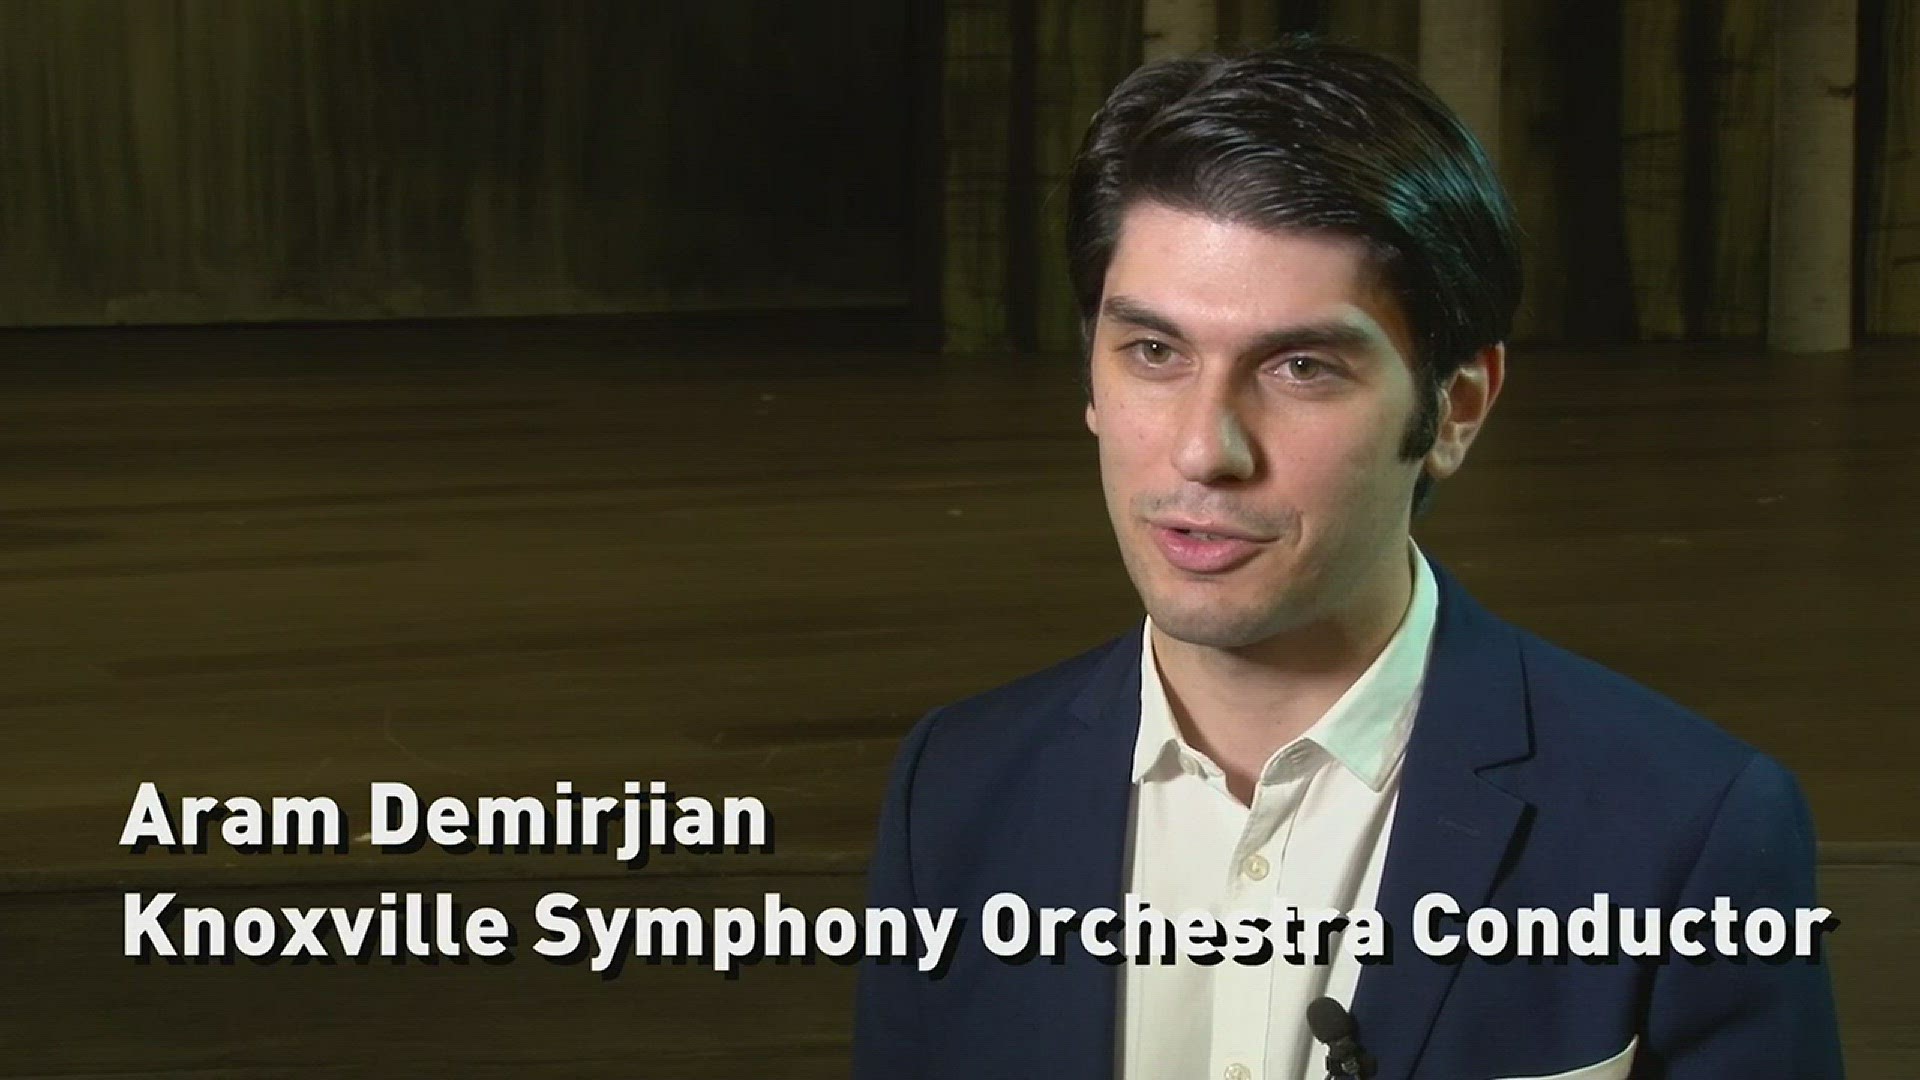 Extended interview with KSO Conductor Aram Demirjian